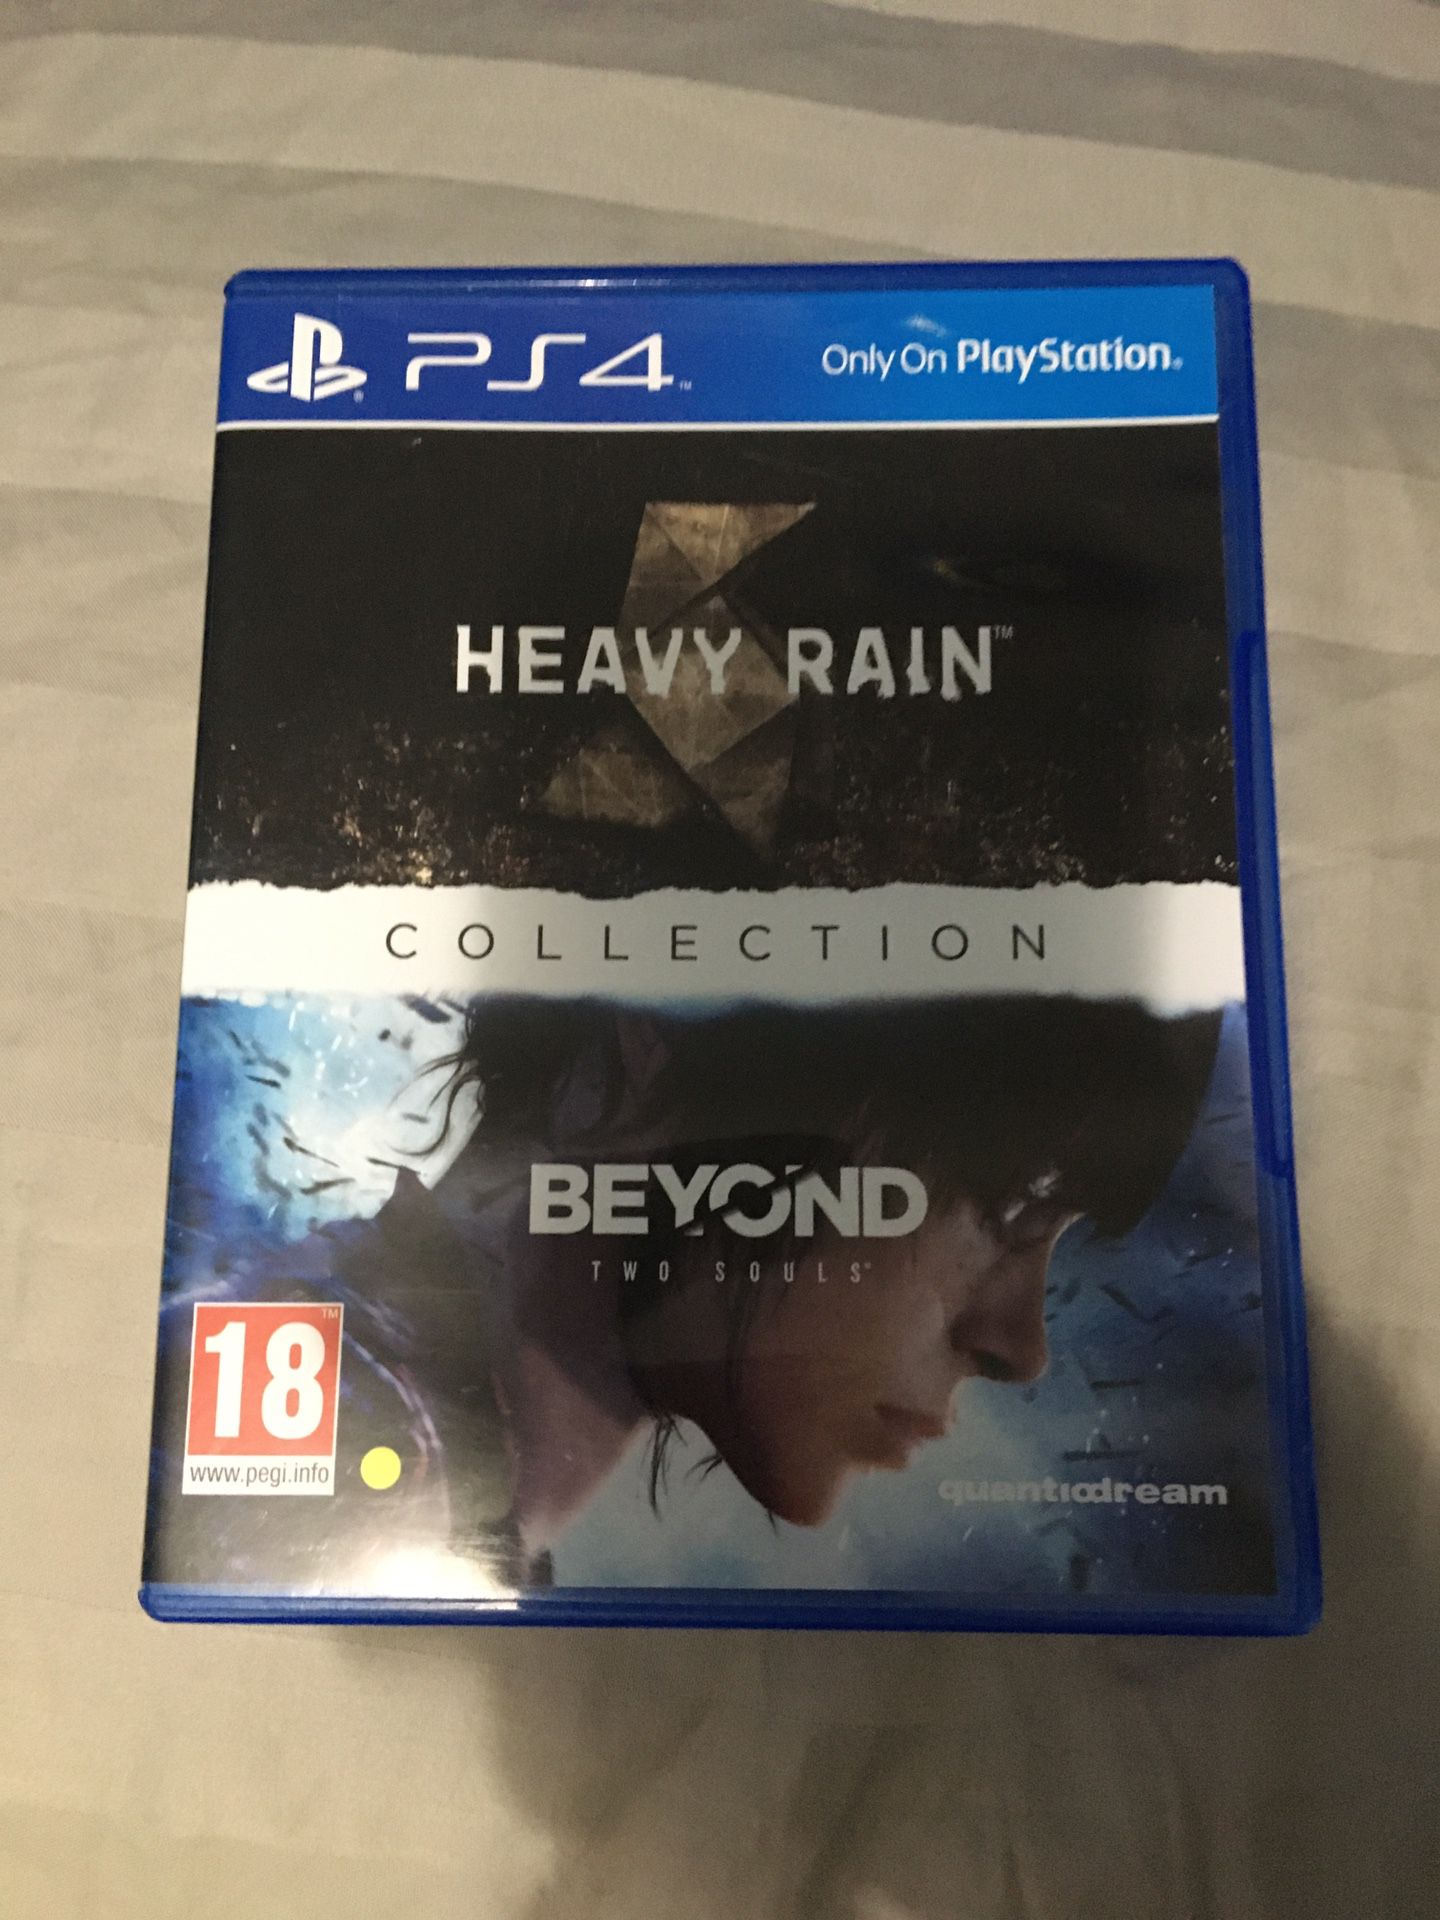 Ps4 heavy rain and beyond collection